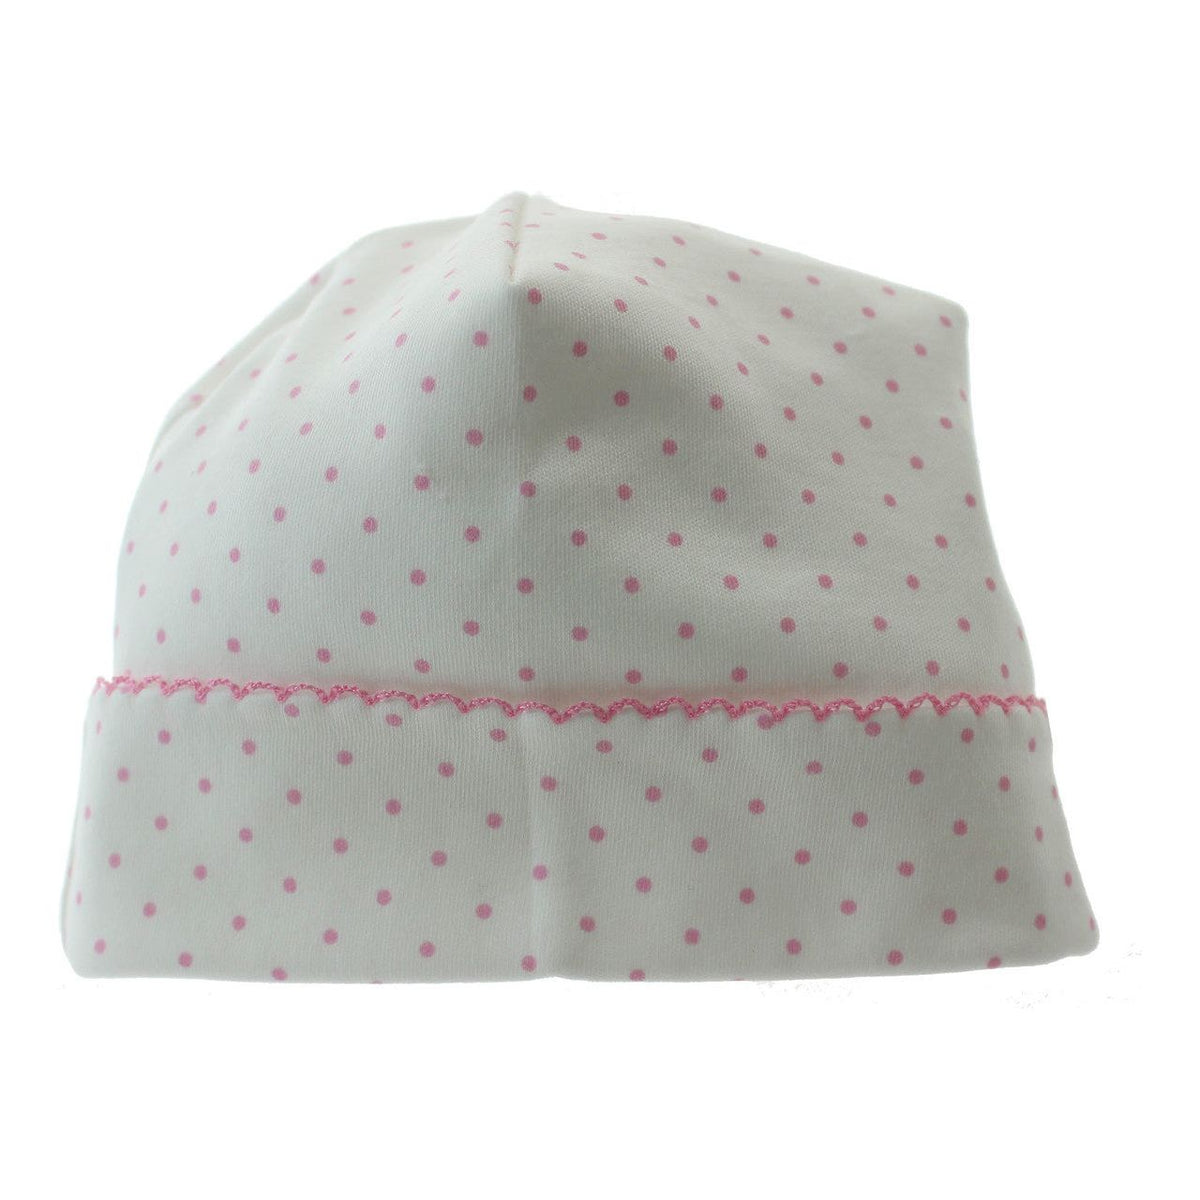 Girls Take Home Hat White and Pink Mini Dots